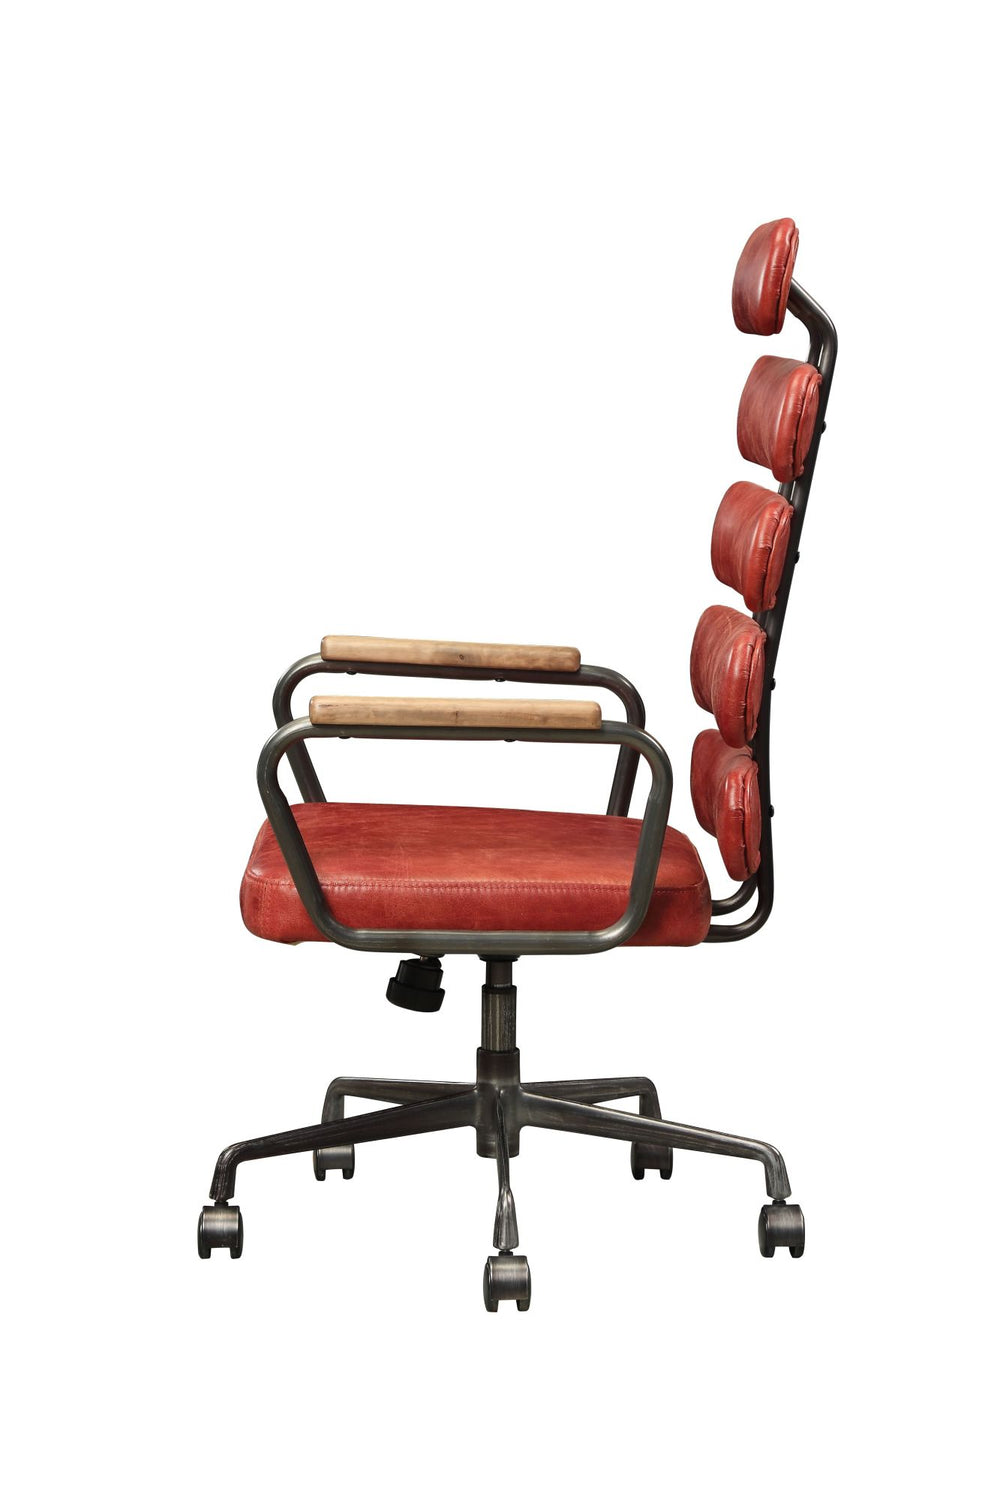 The Barcelona Leather Office Chair